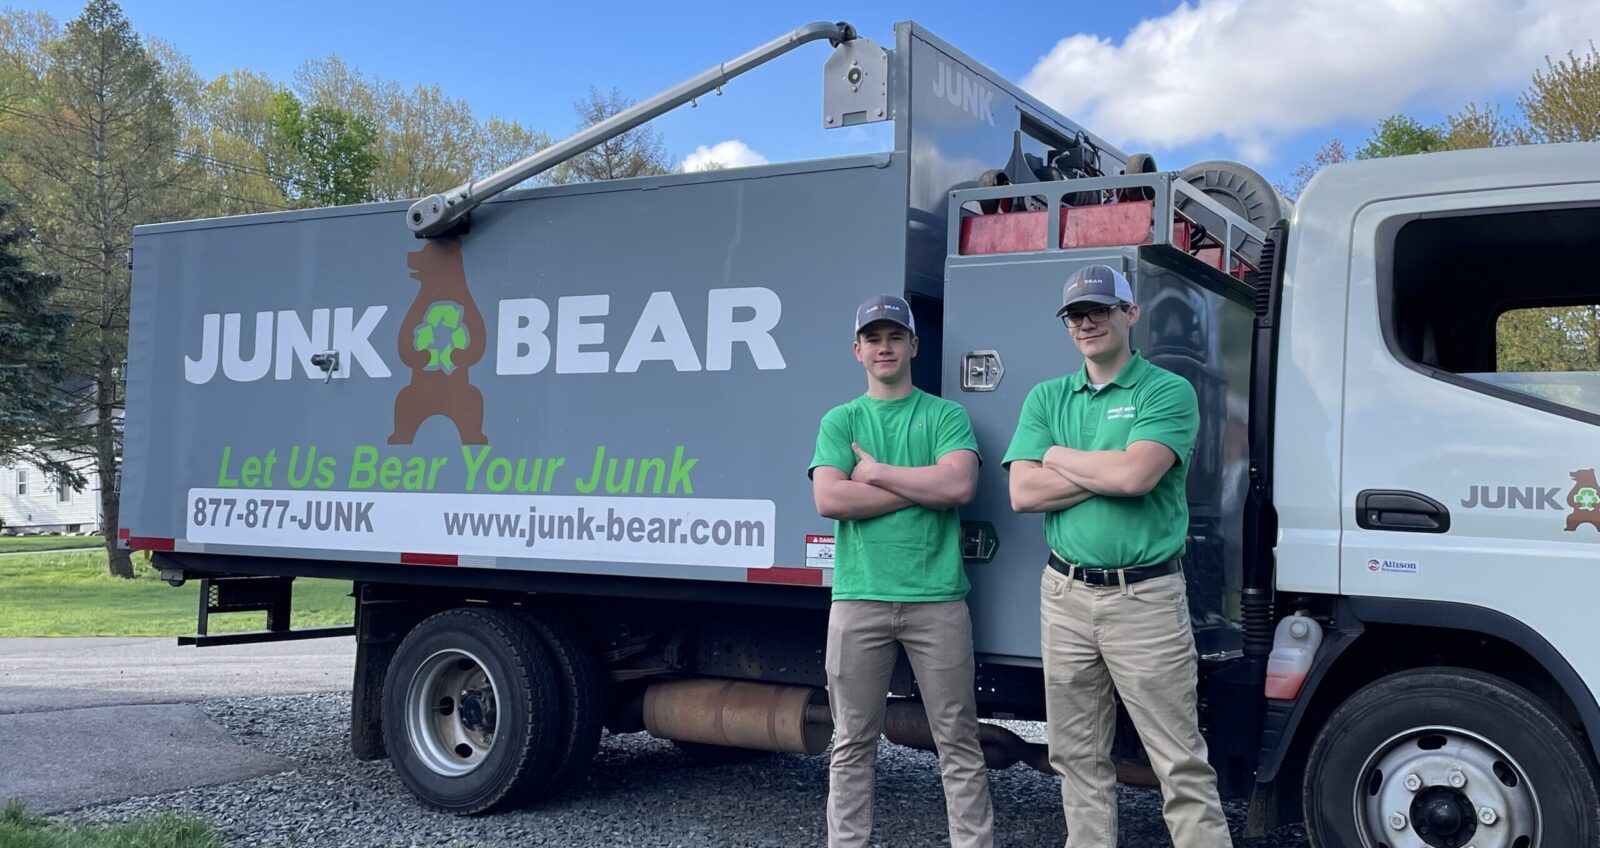 Junk Bear crew smiling next to the company truck